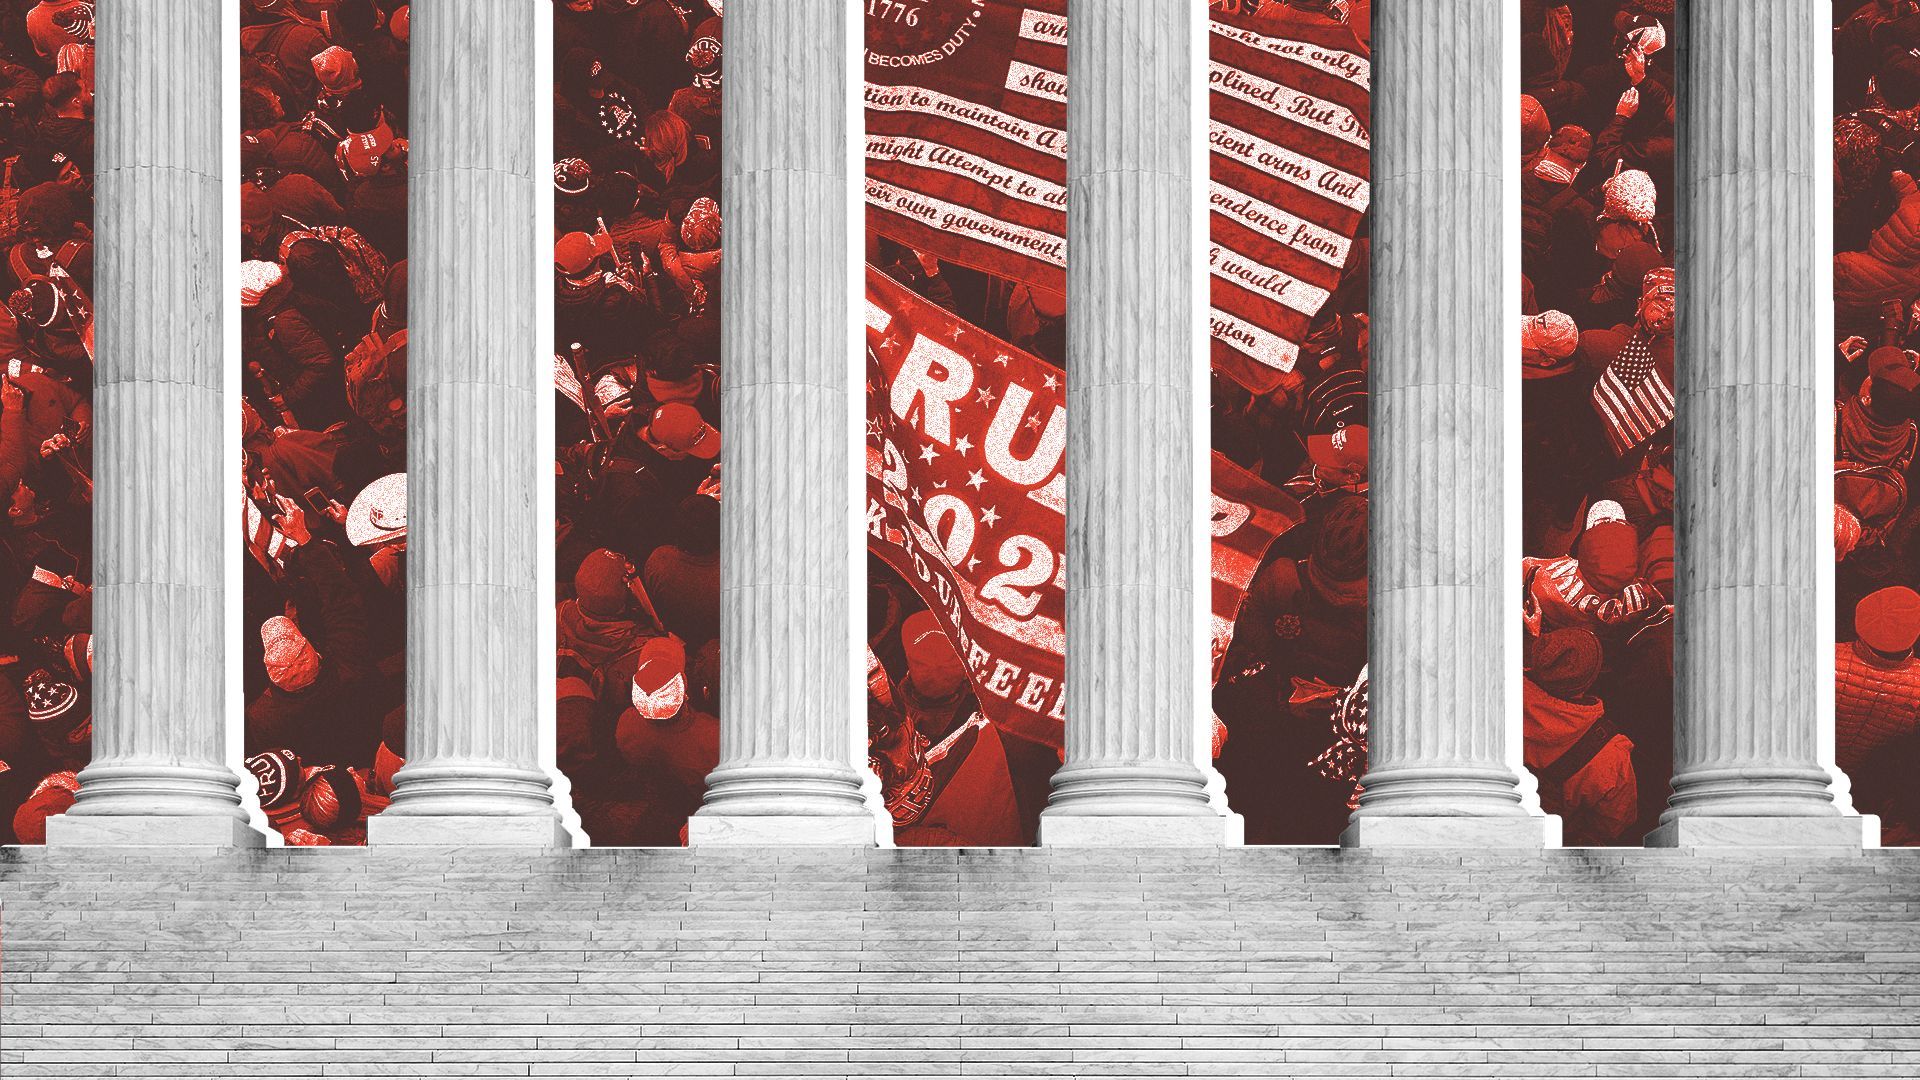 Photo illustration of the front steps and columns of the Supreme Court building juxtaposed with an aerial show of a crowd at the January 6th Insurrection, seen in the spaces between the pillars of the building.